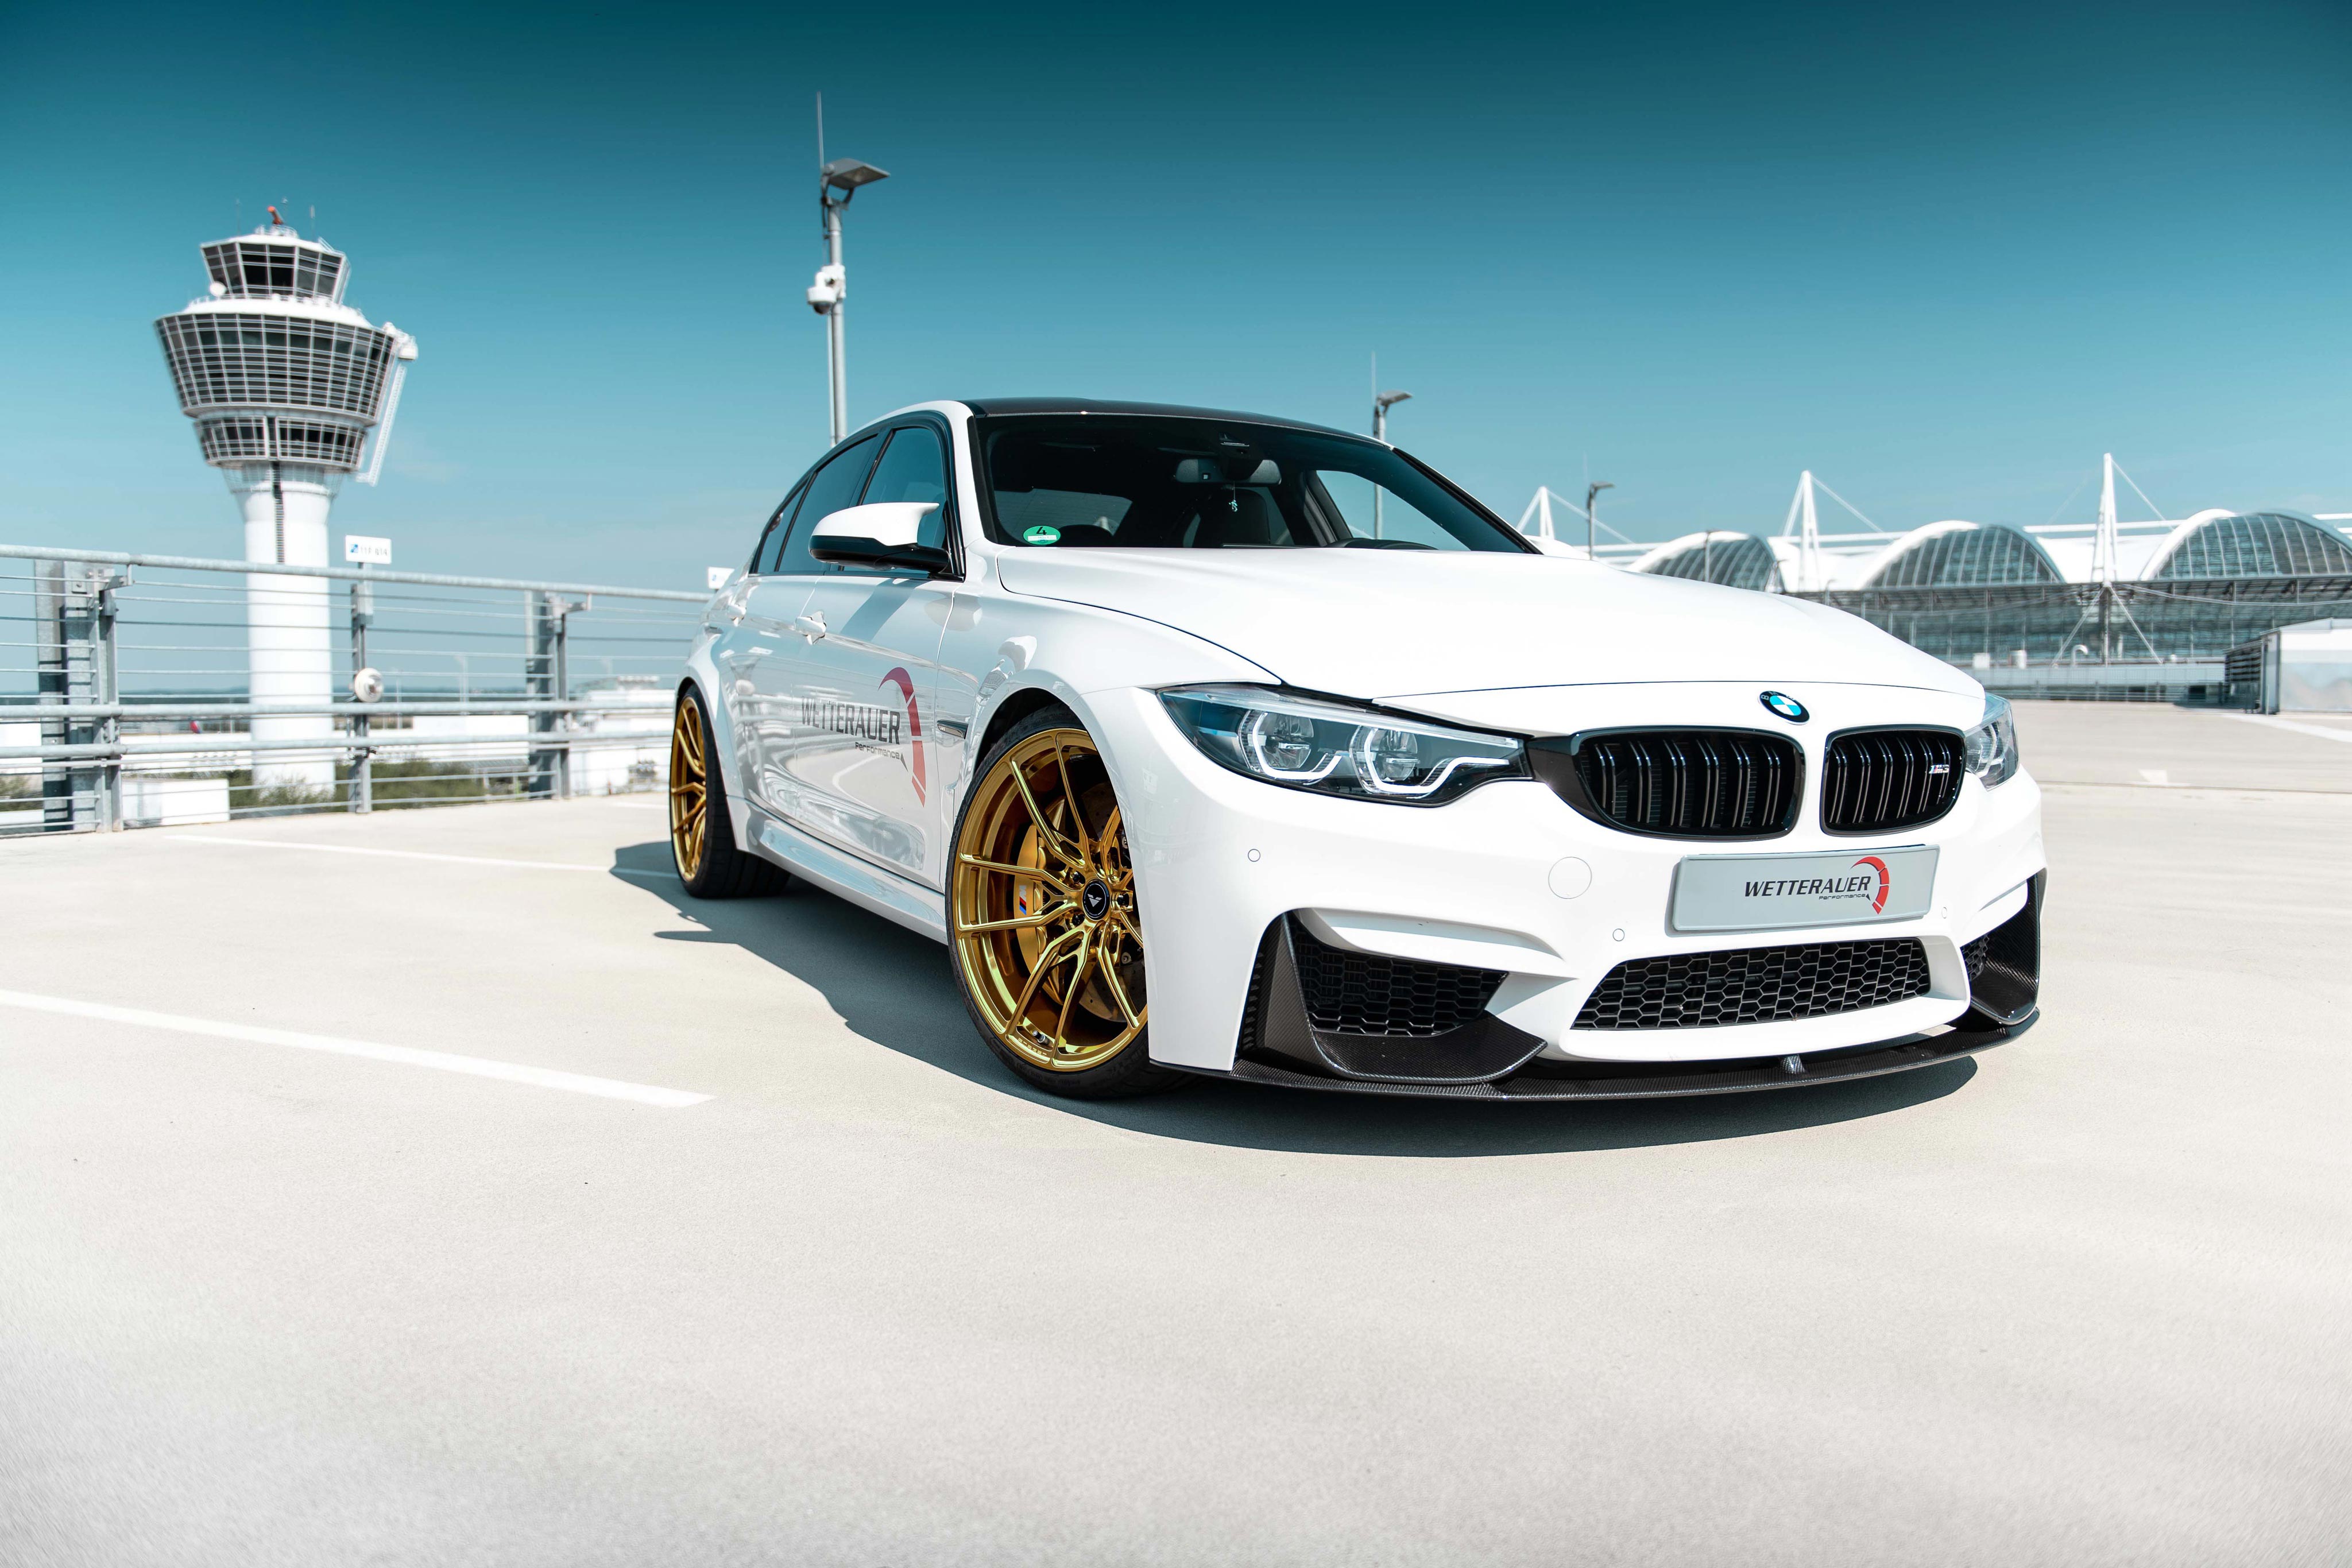 Wetterauer Performance Bmw M3 Gts 2018 4k Hd Cars 4k Wallpapers Images Backgrounds Photos And Pictures